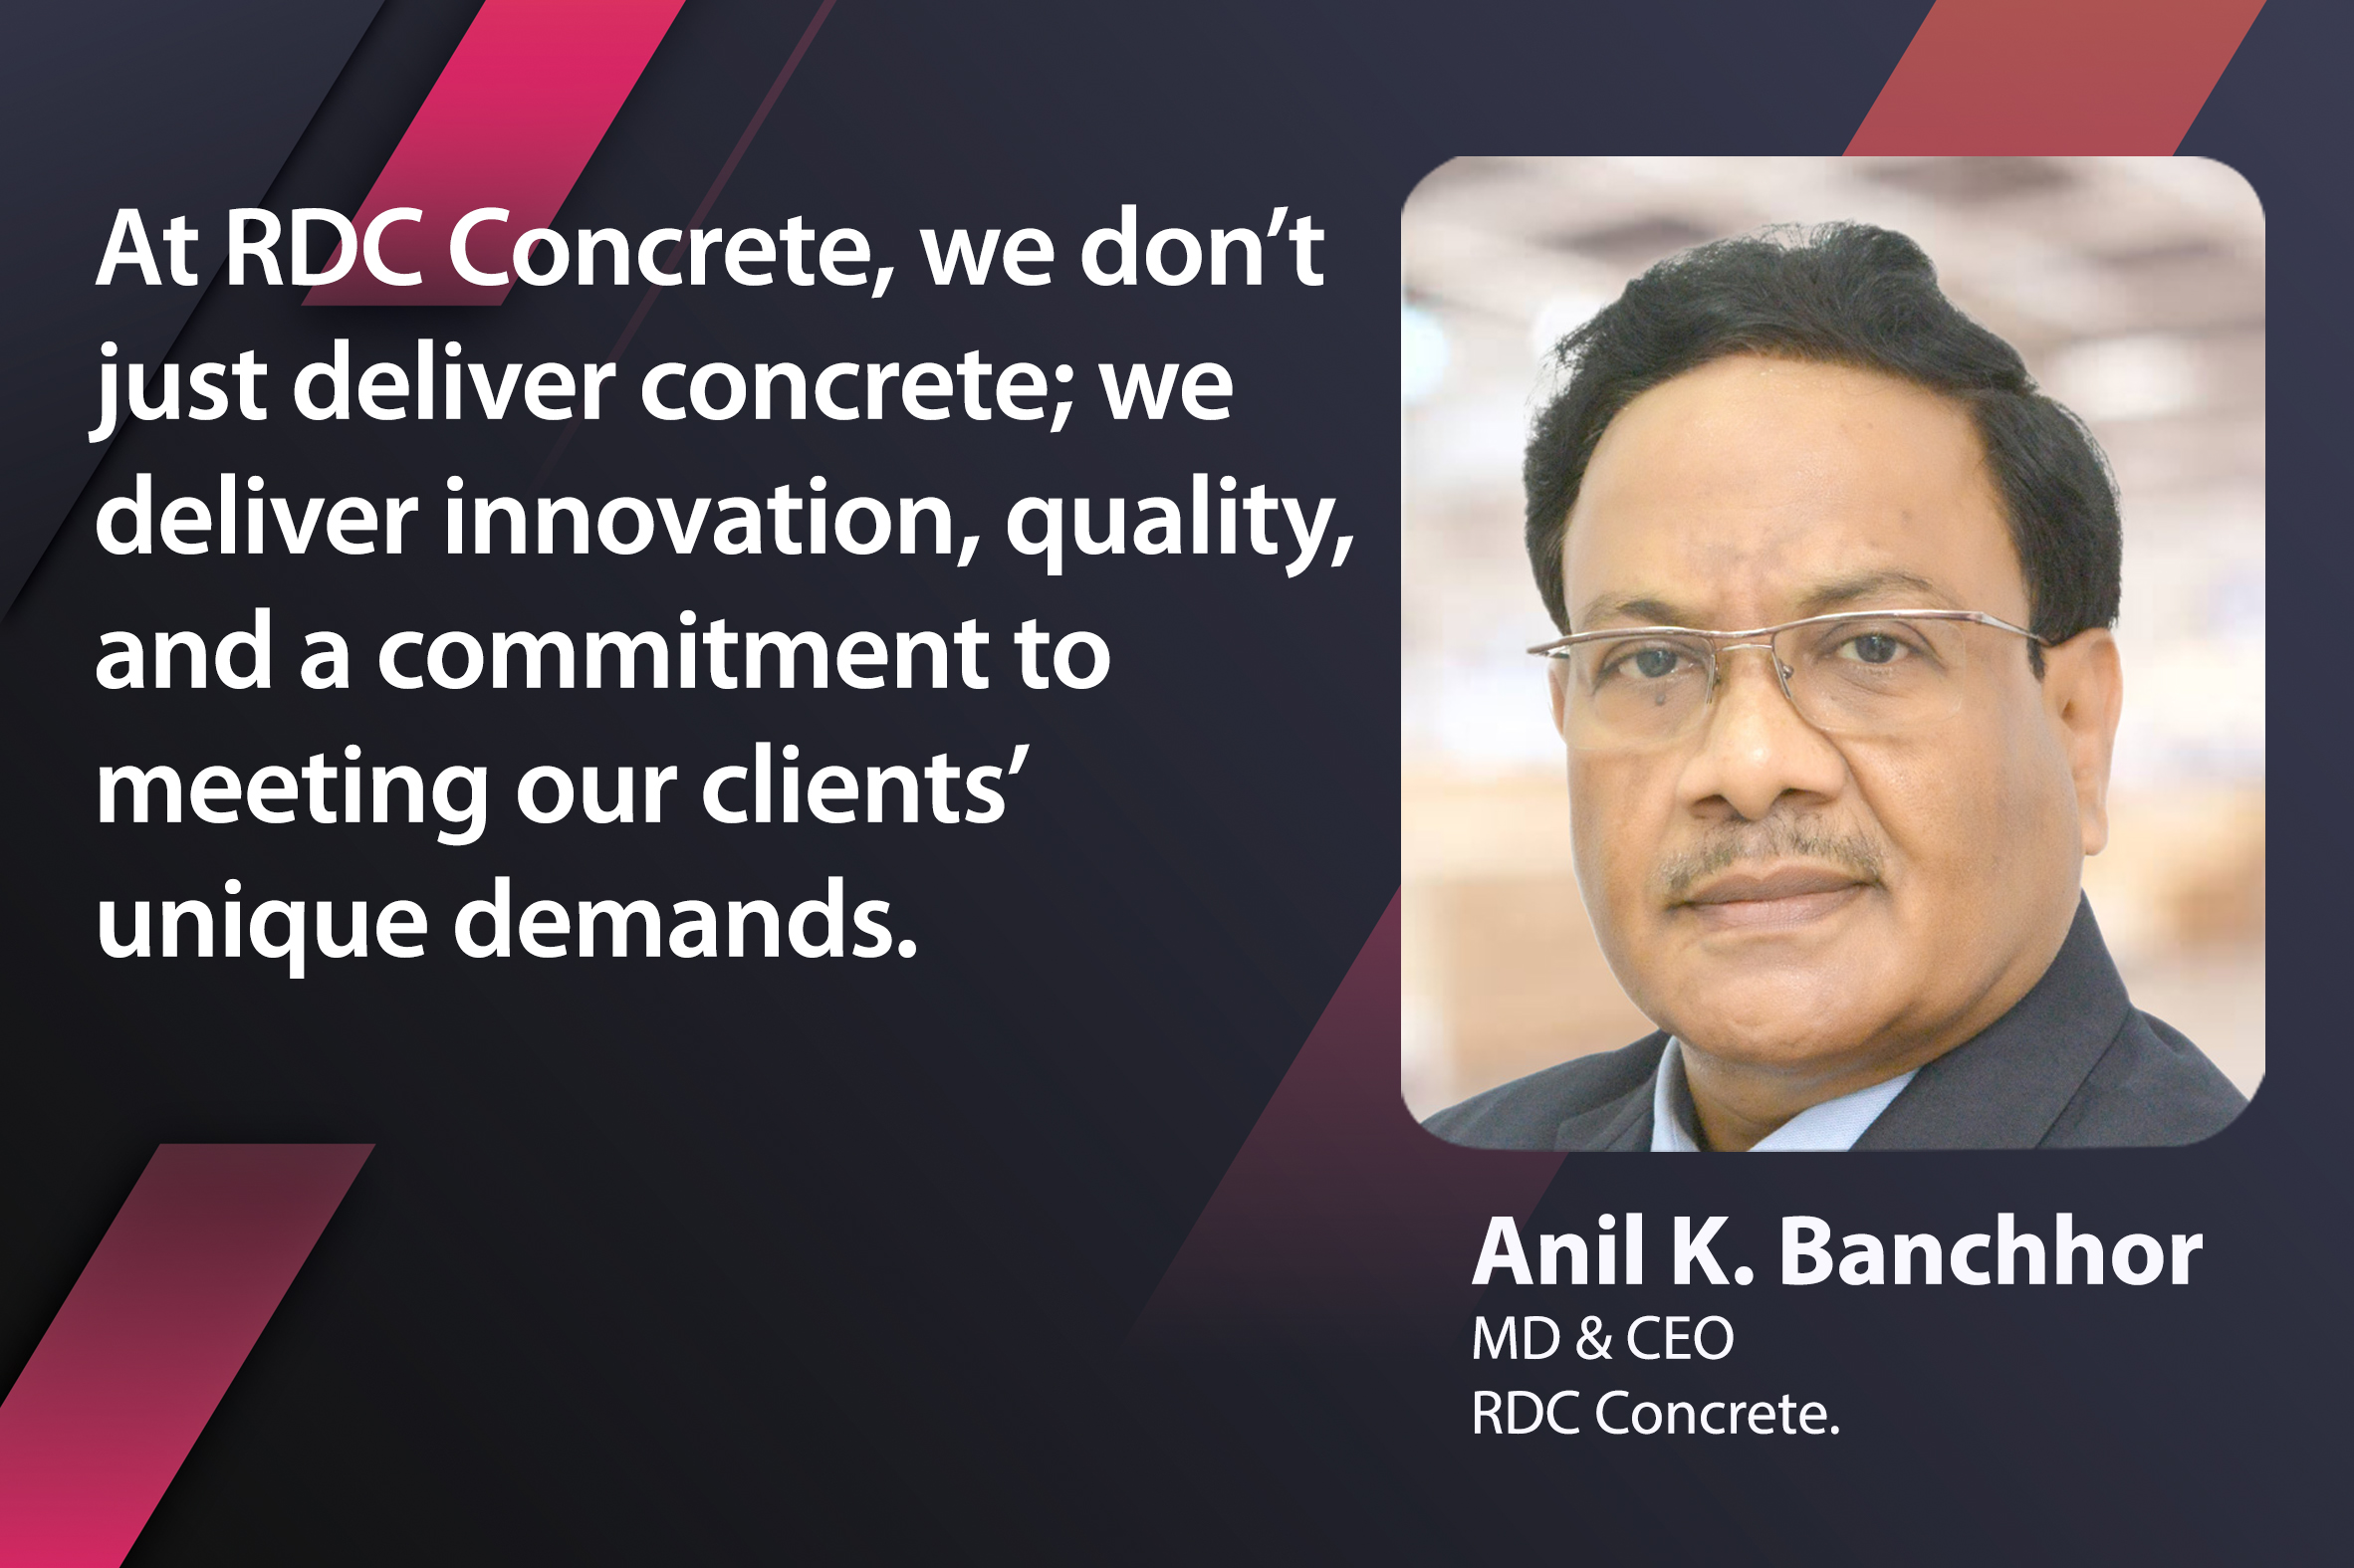 RDC Concrete is leading the way in customised RMC solutions